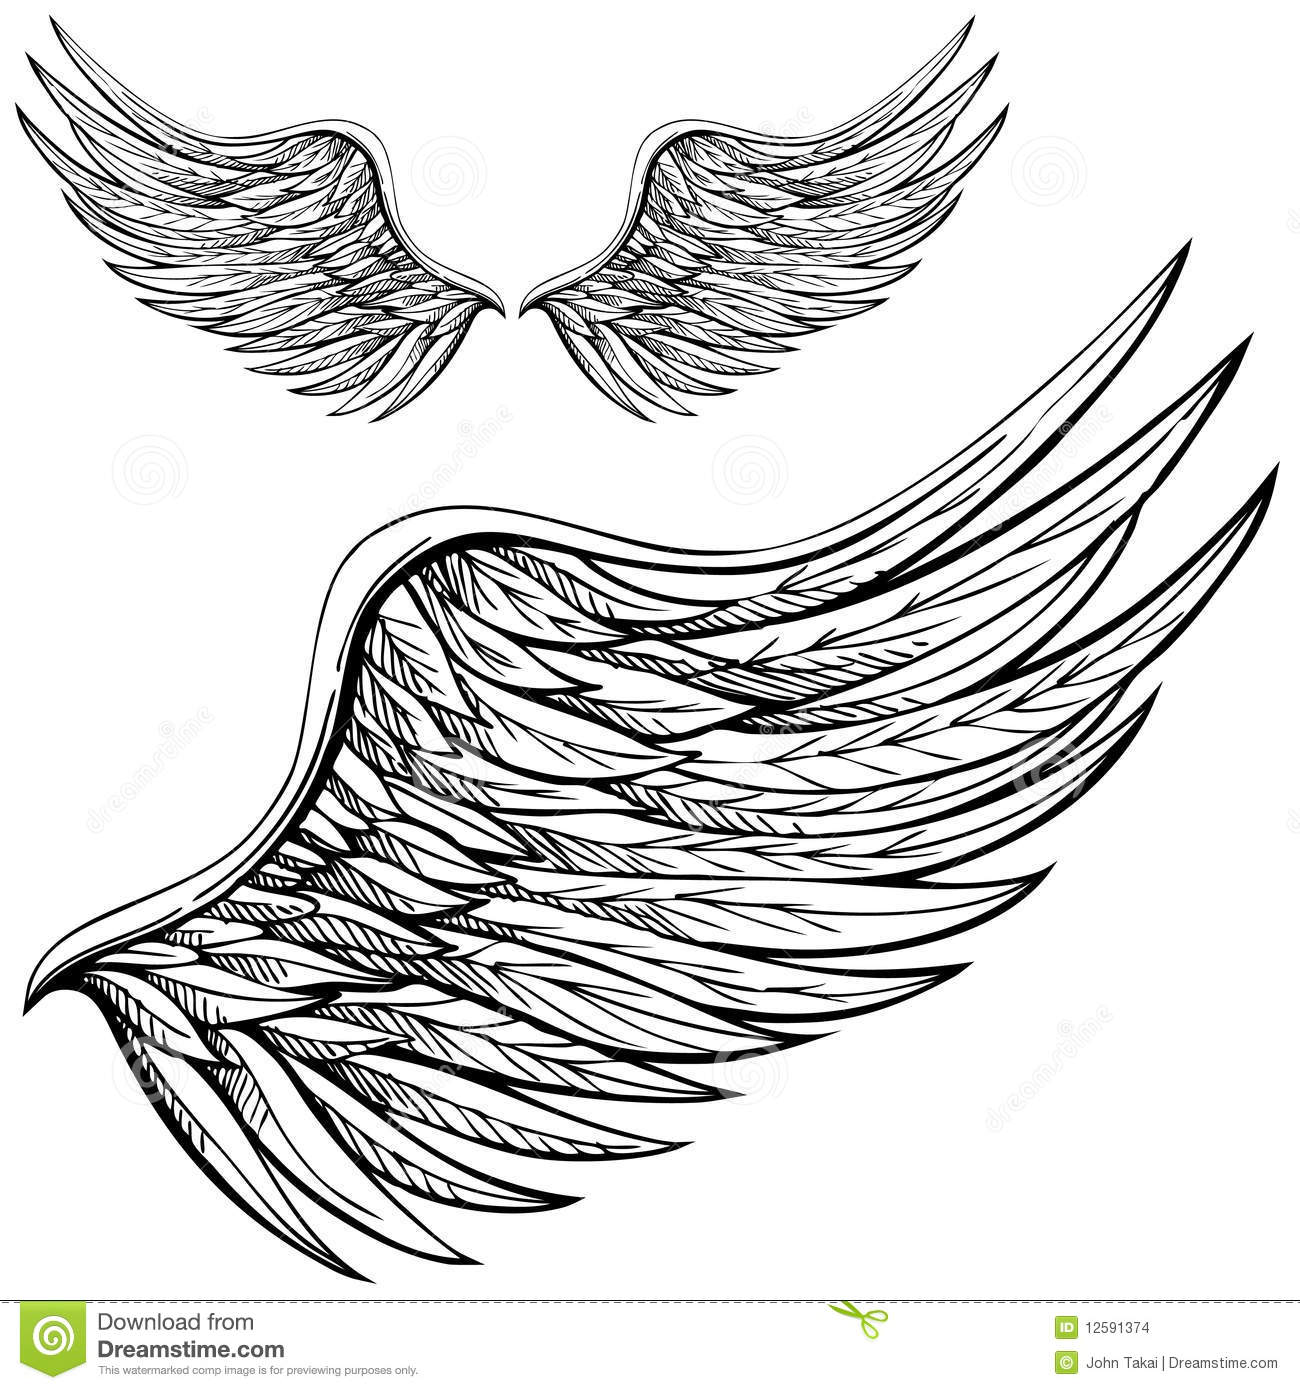 Cartoon Angel Wings In Black And White  Drawn By Hand